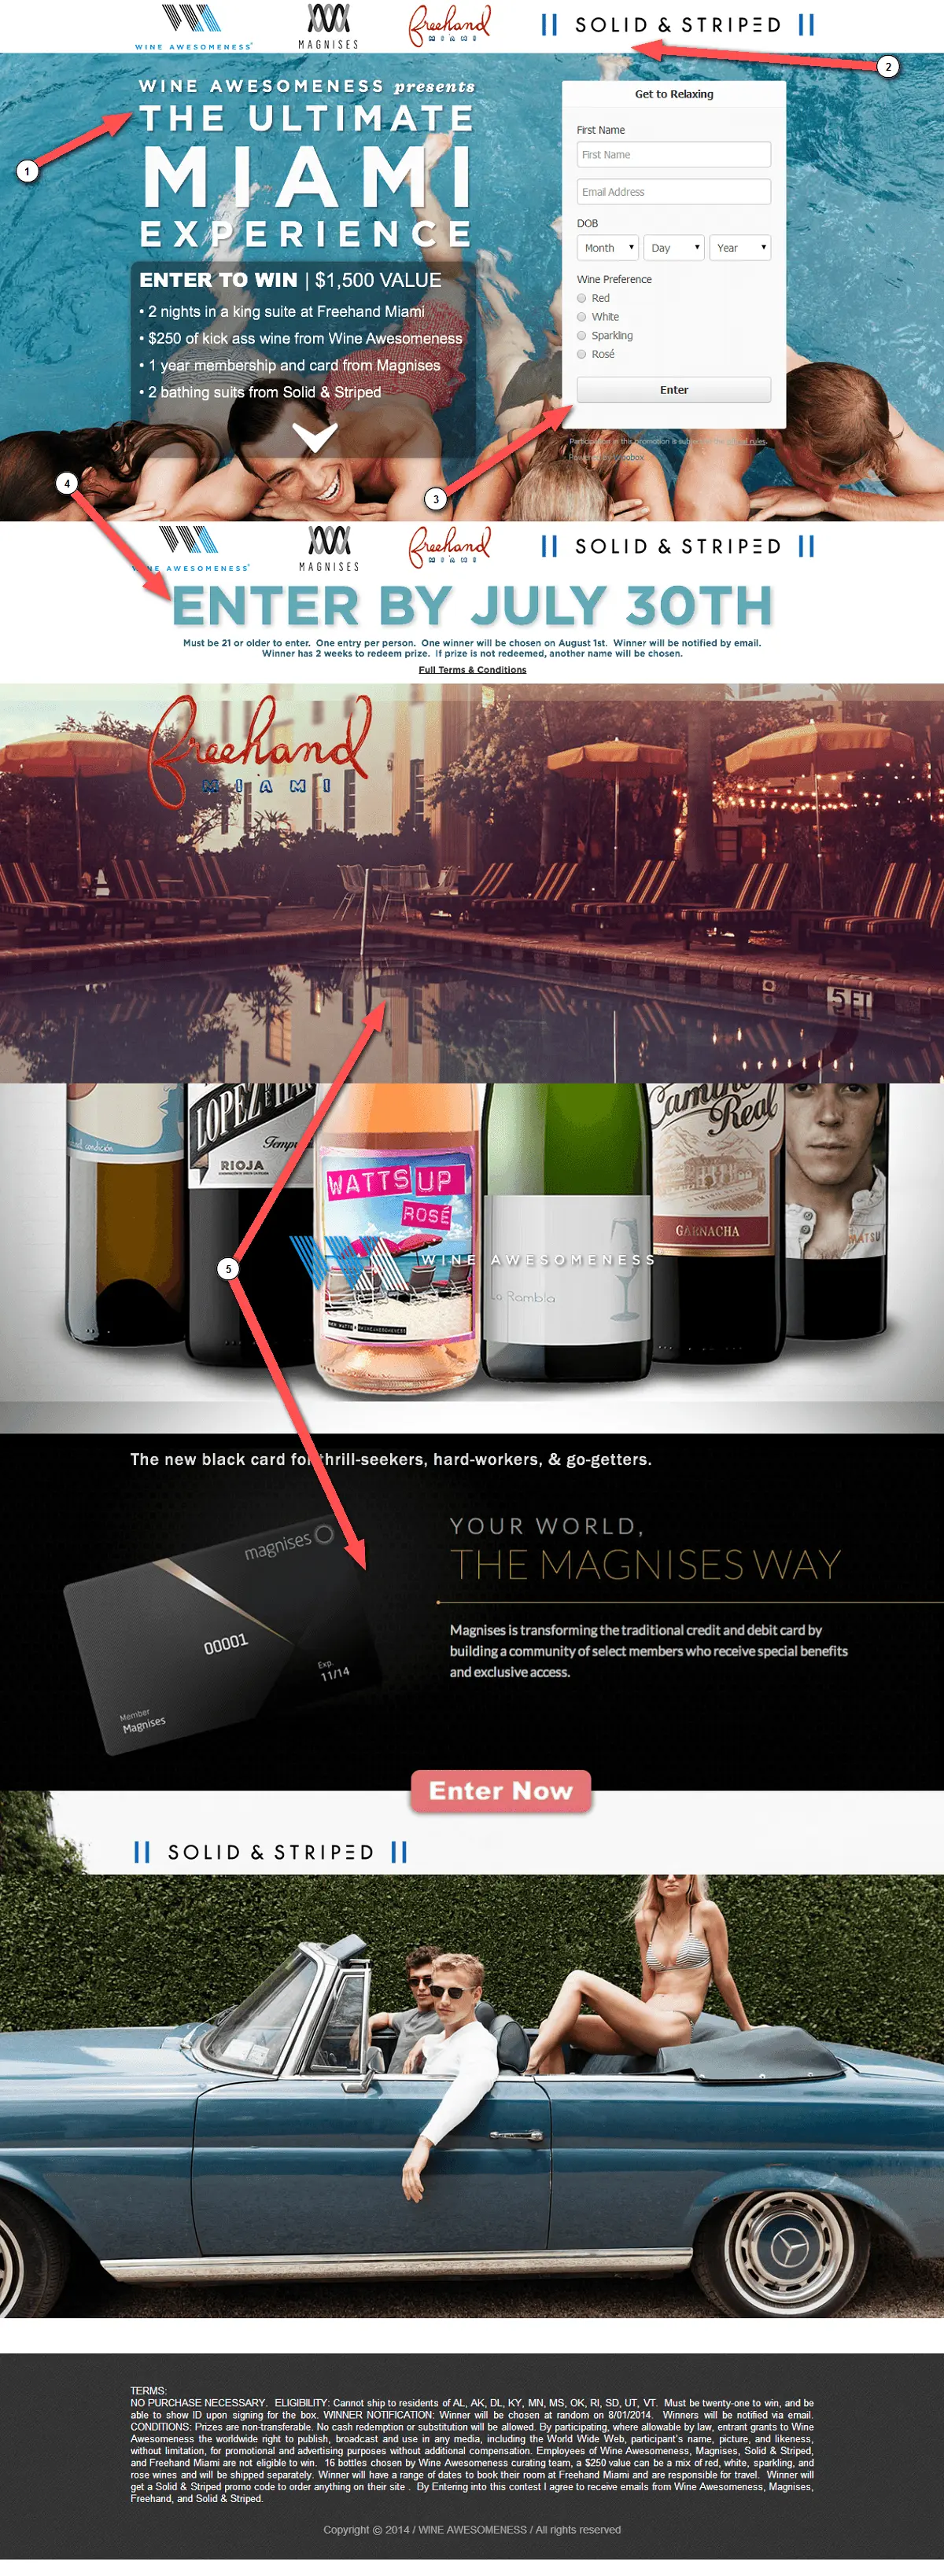 Wine Awesomeness Landing Page Review